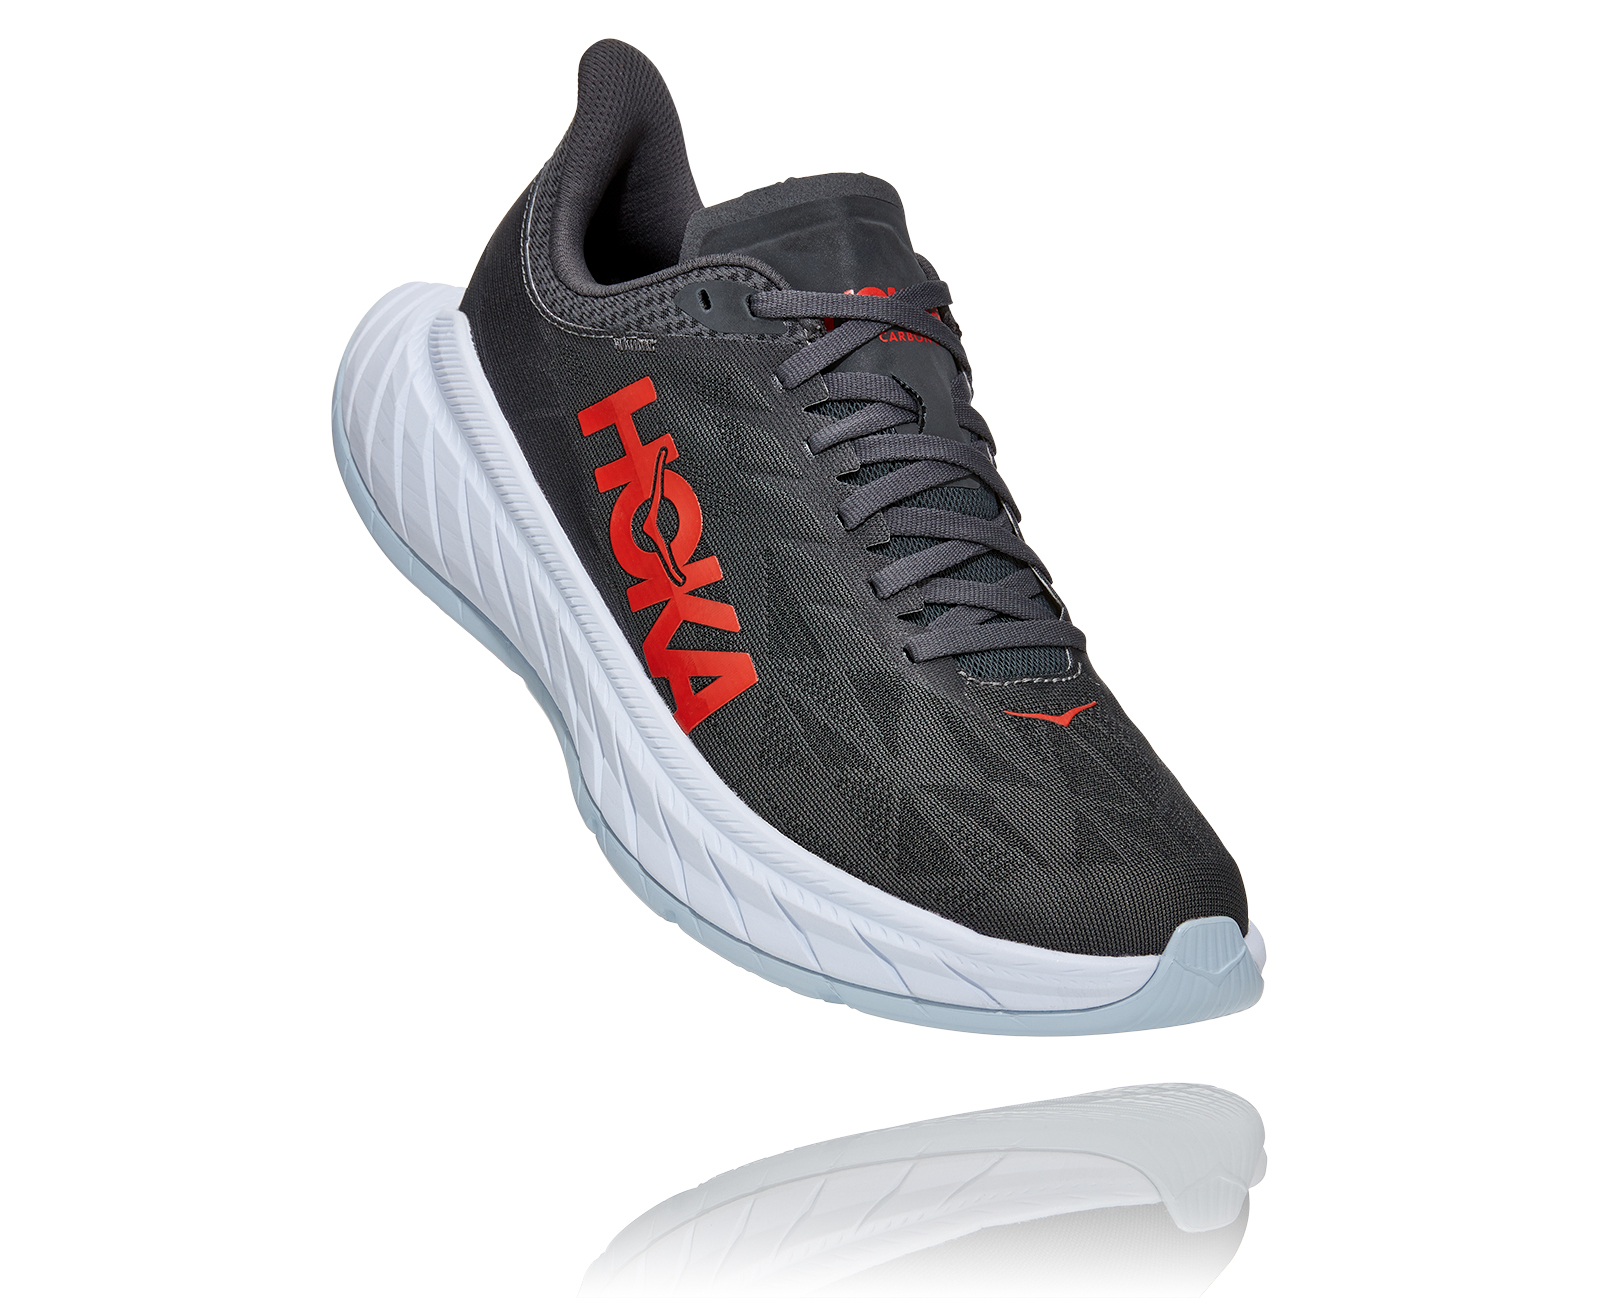 HOKA ONE ONE CARBON X2 GRISE ET ROUGE Chaussures de running